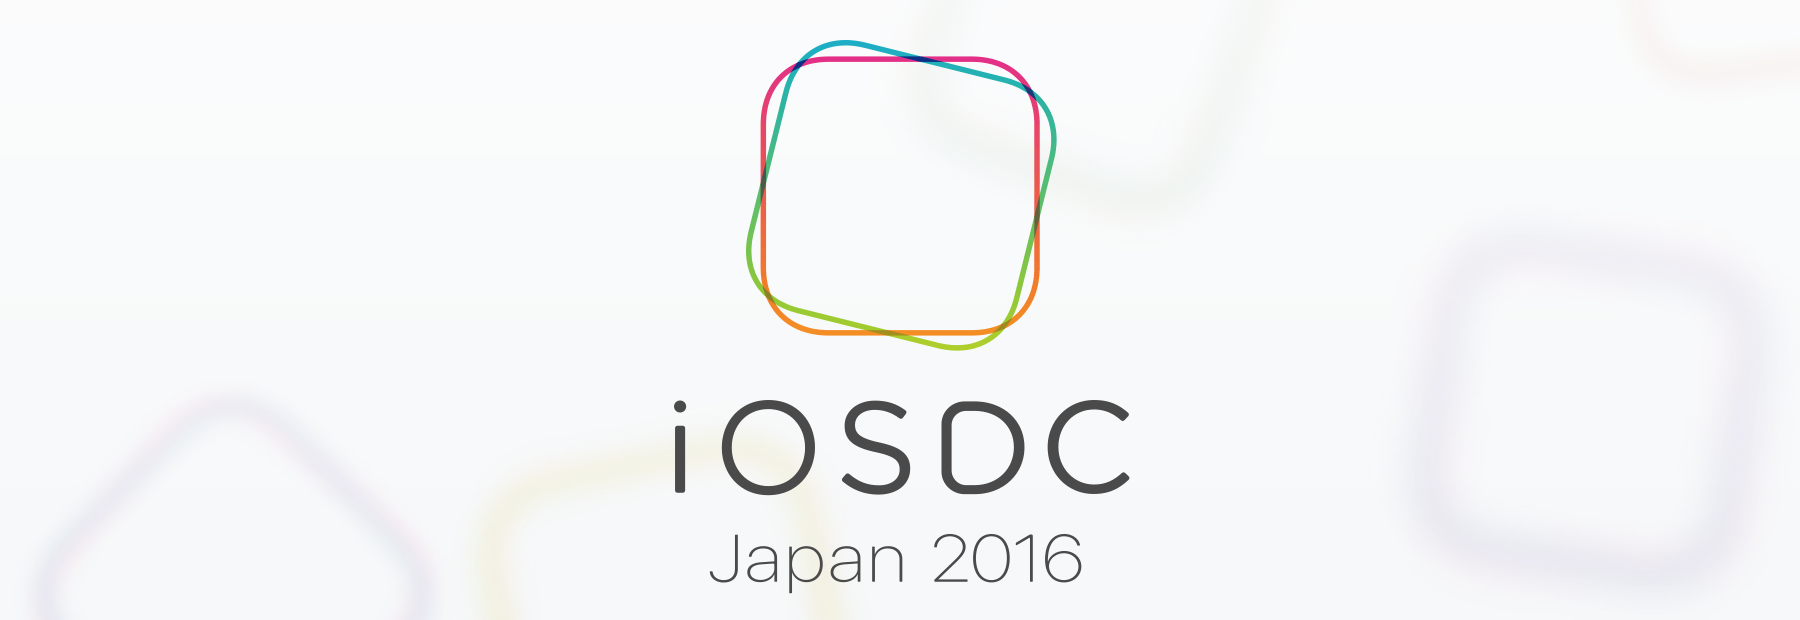 iosdc1.png